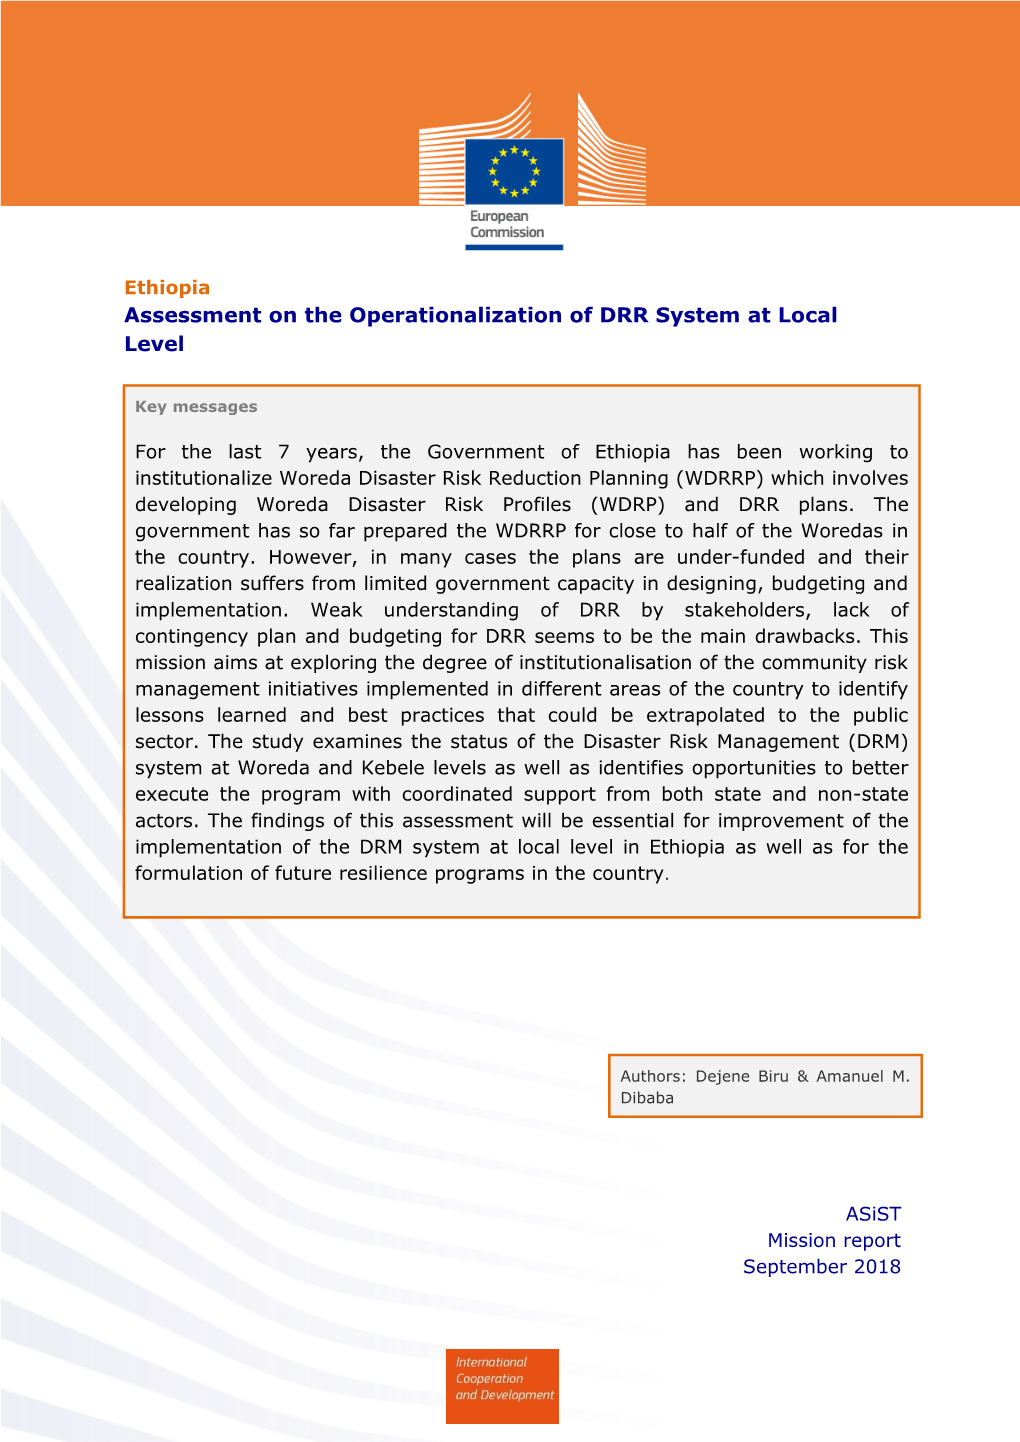 Assessment on the Operationalization of DRR System at Local Level